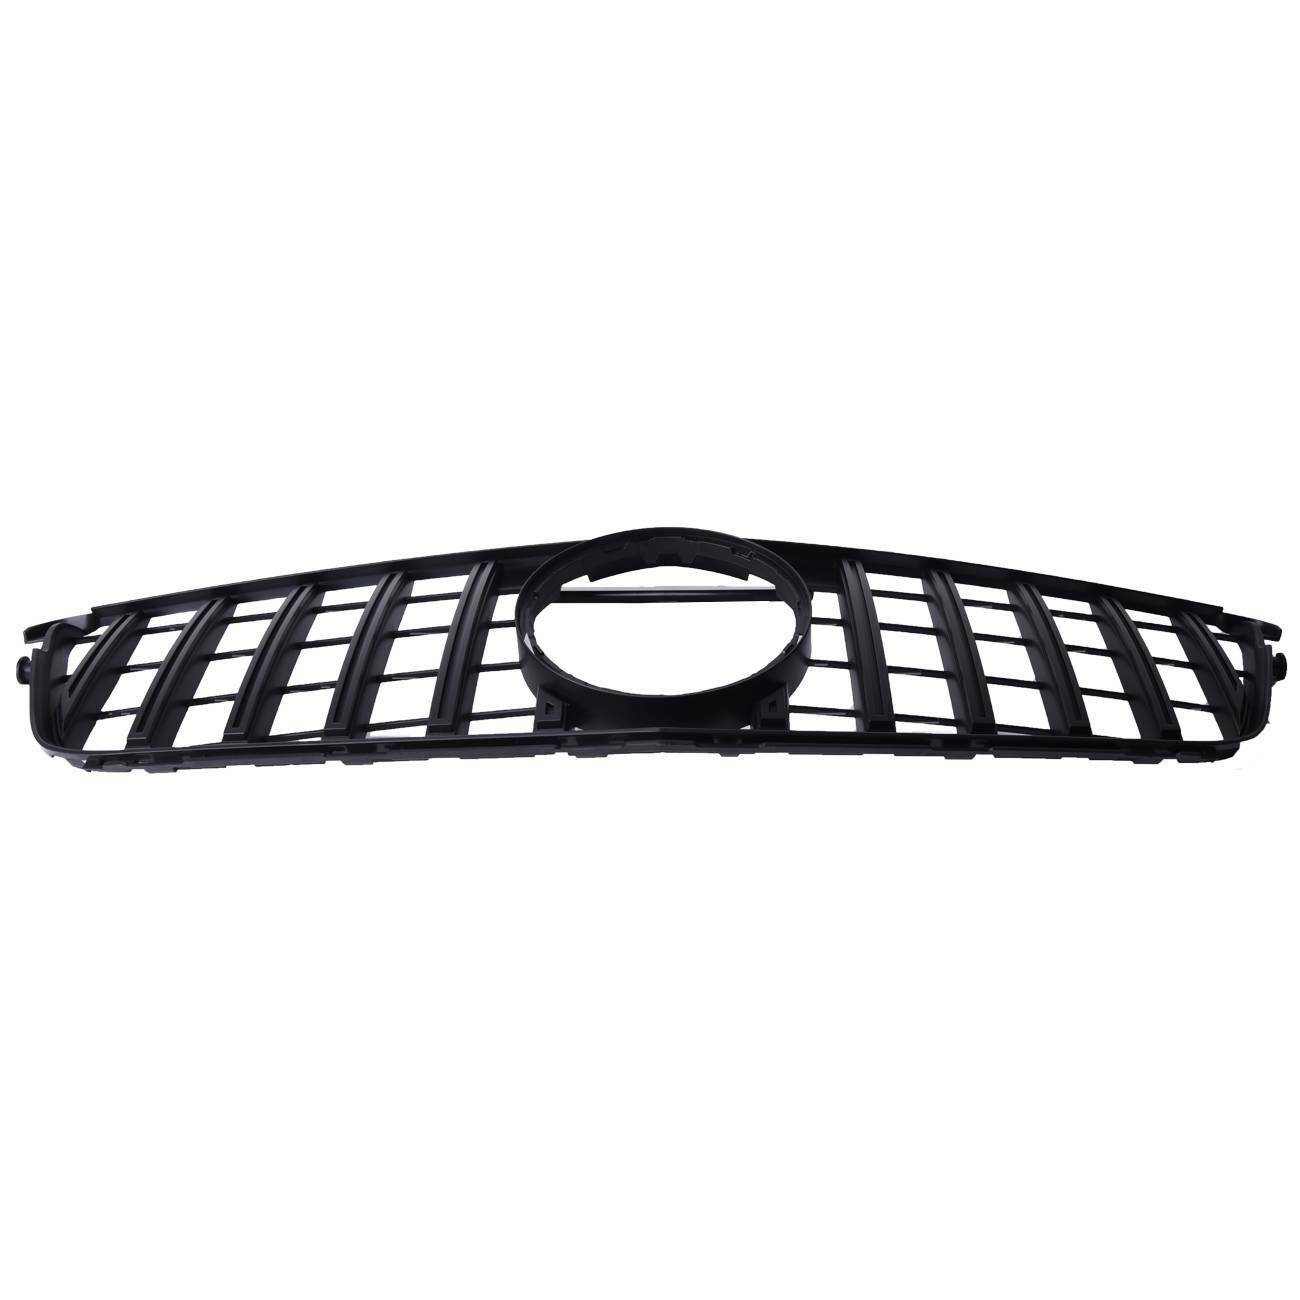 Front Mesh Grille Chrome for Mercedes C-CLASS W204 S204 C220 C350 CDI German Made